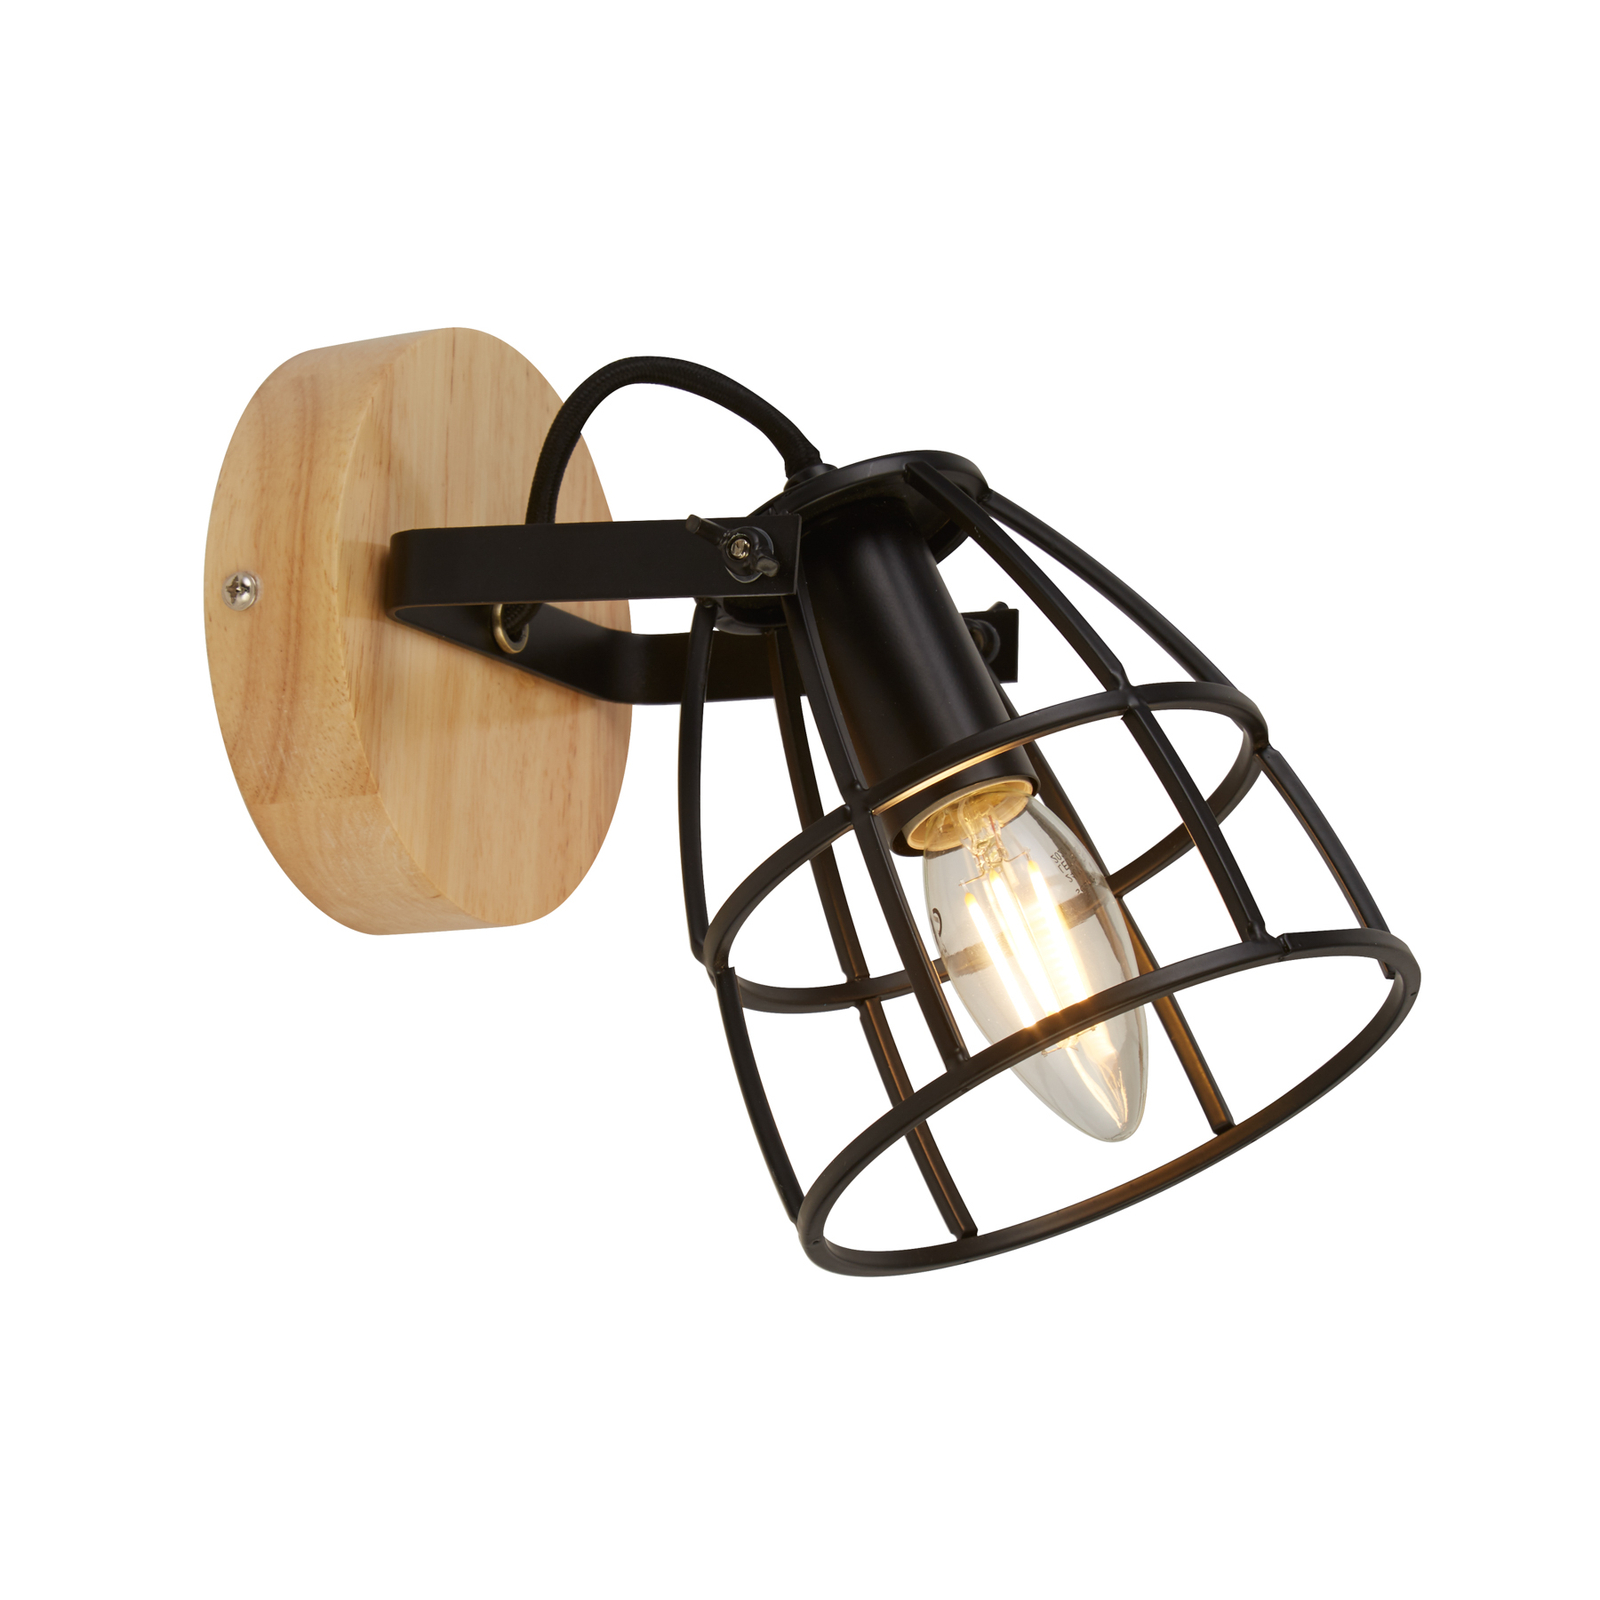 Cage II wall lamp with a grid-like lampshade